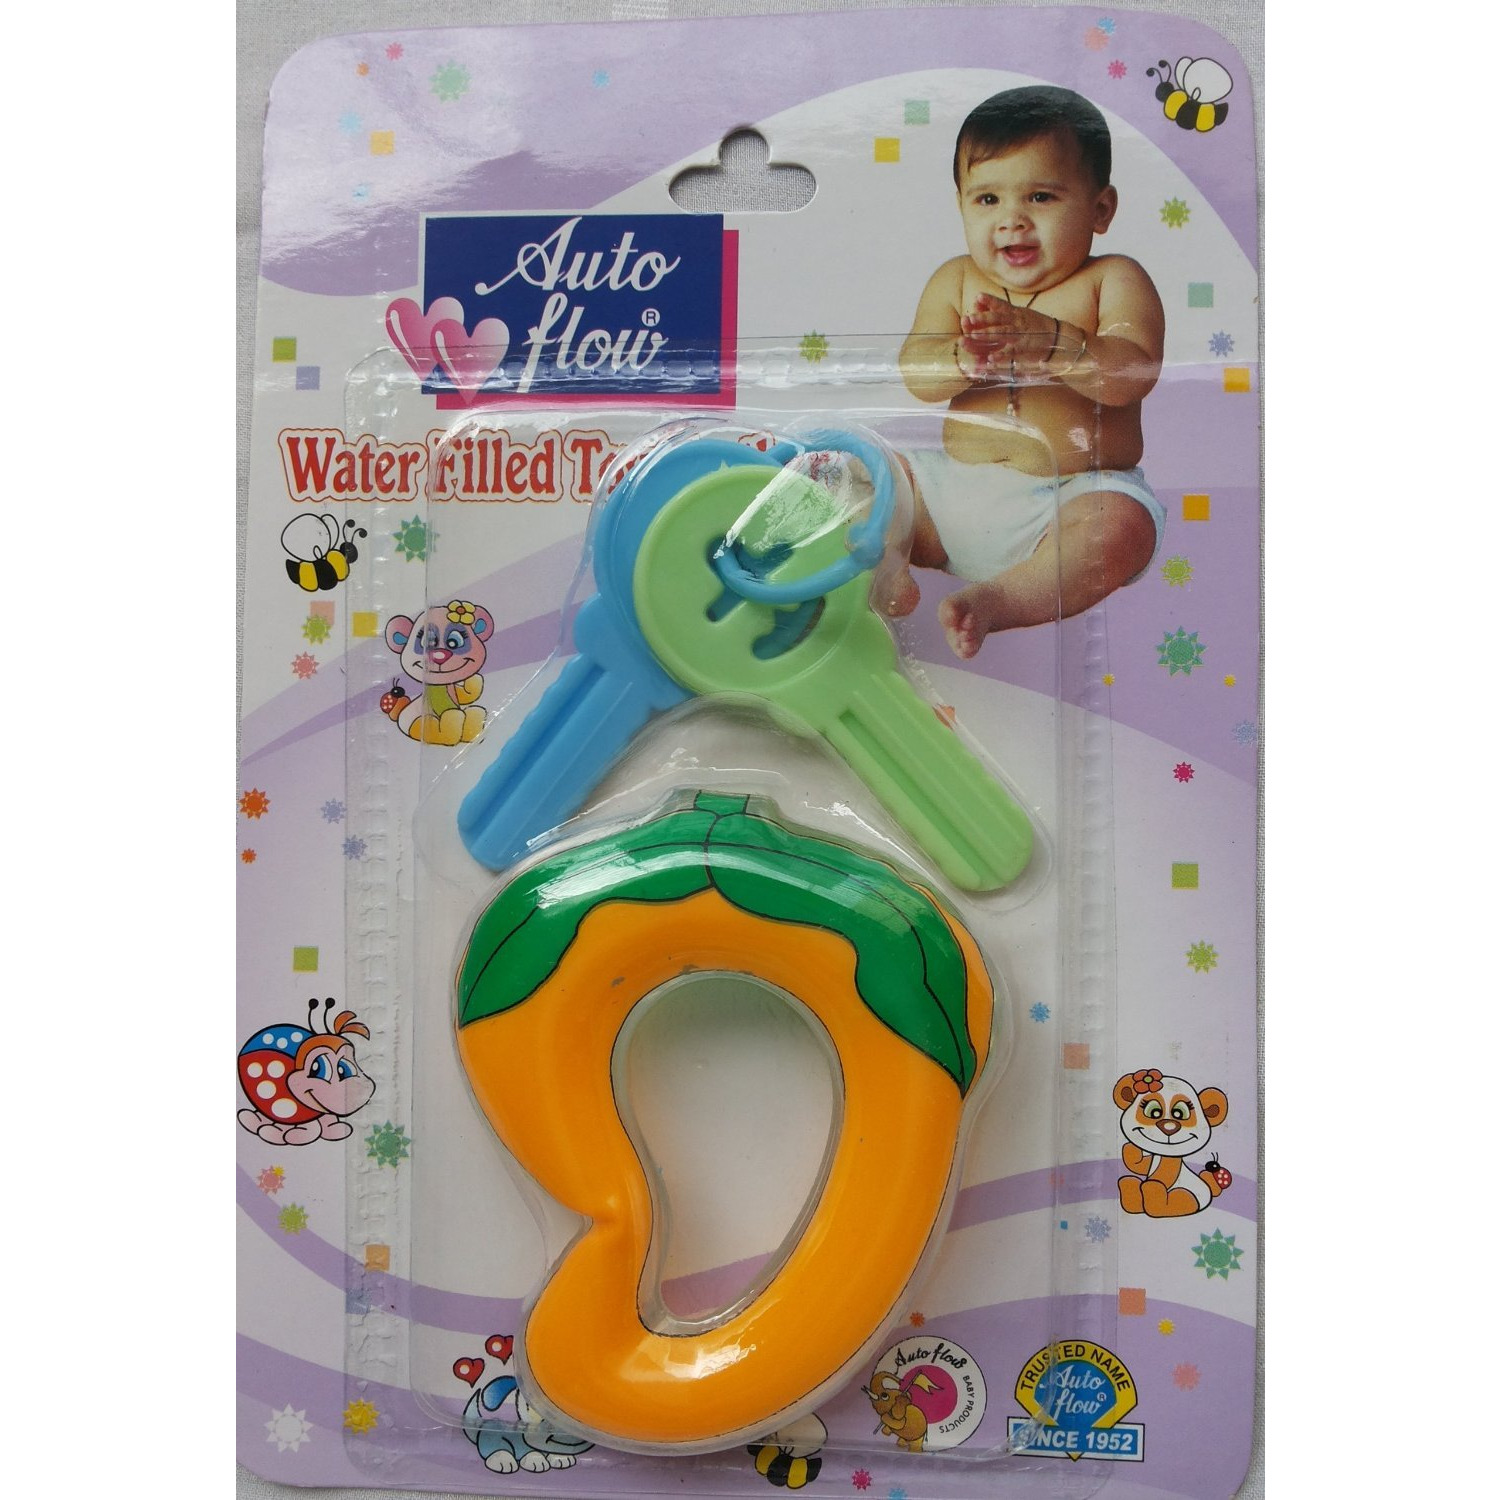 Love Baby Auto Flow Water Filled Toy Teether - BT28 Combo